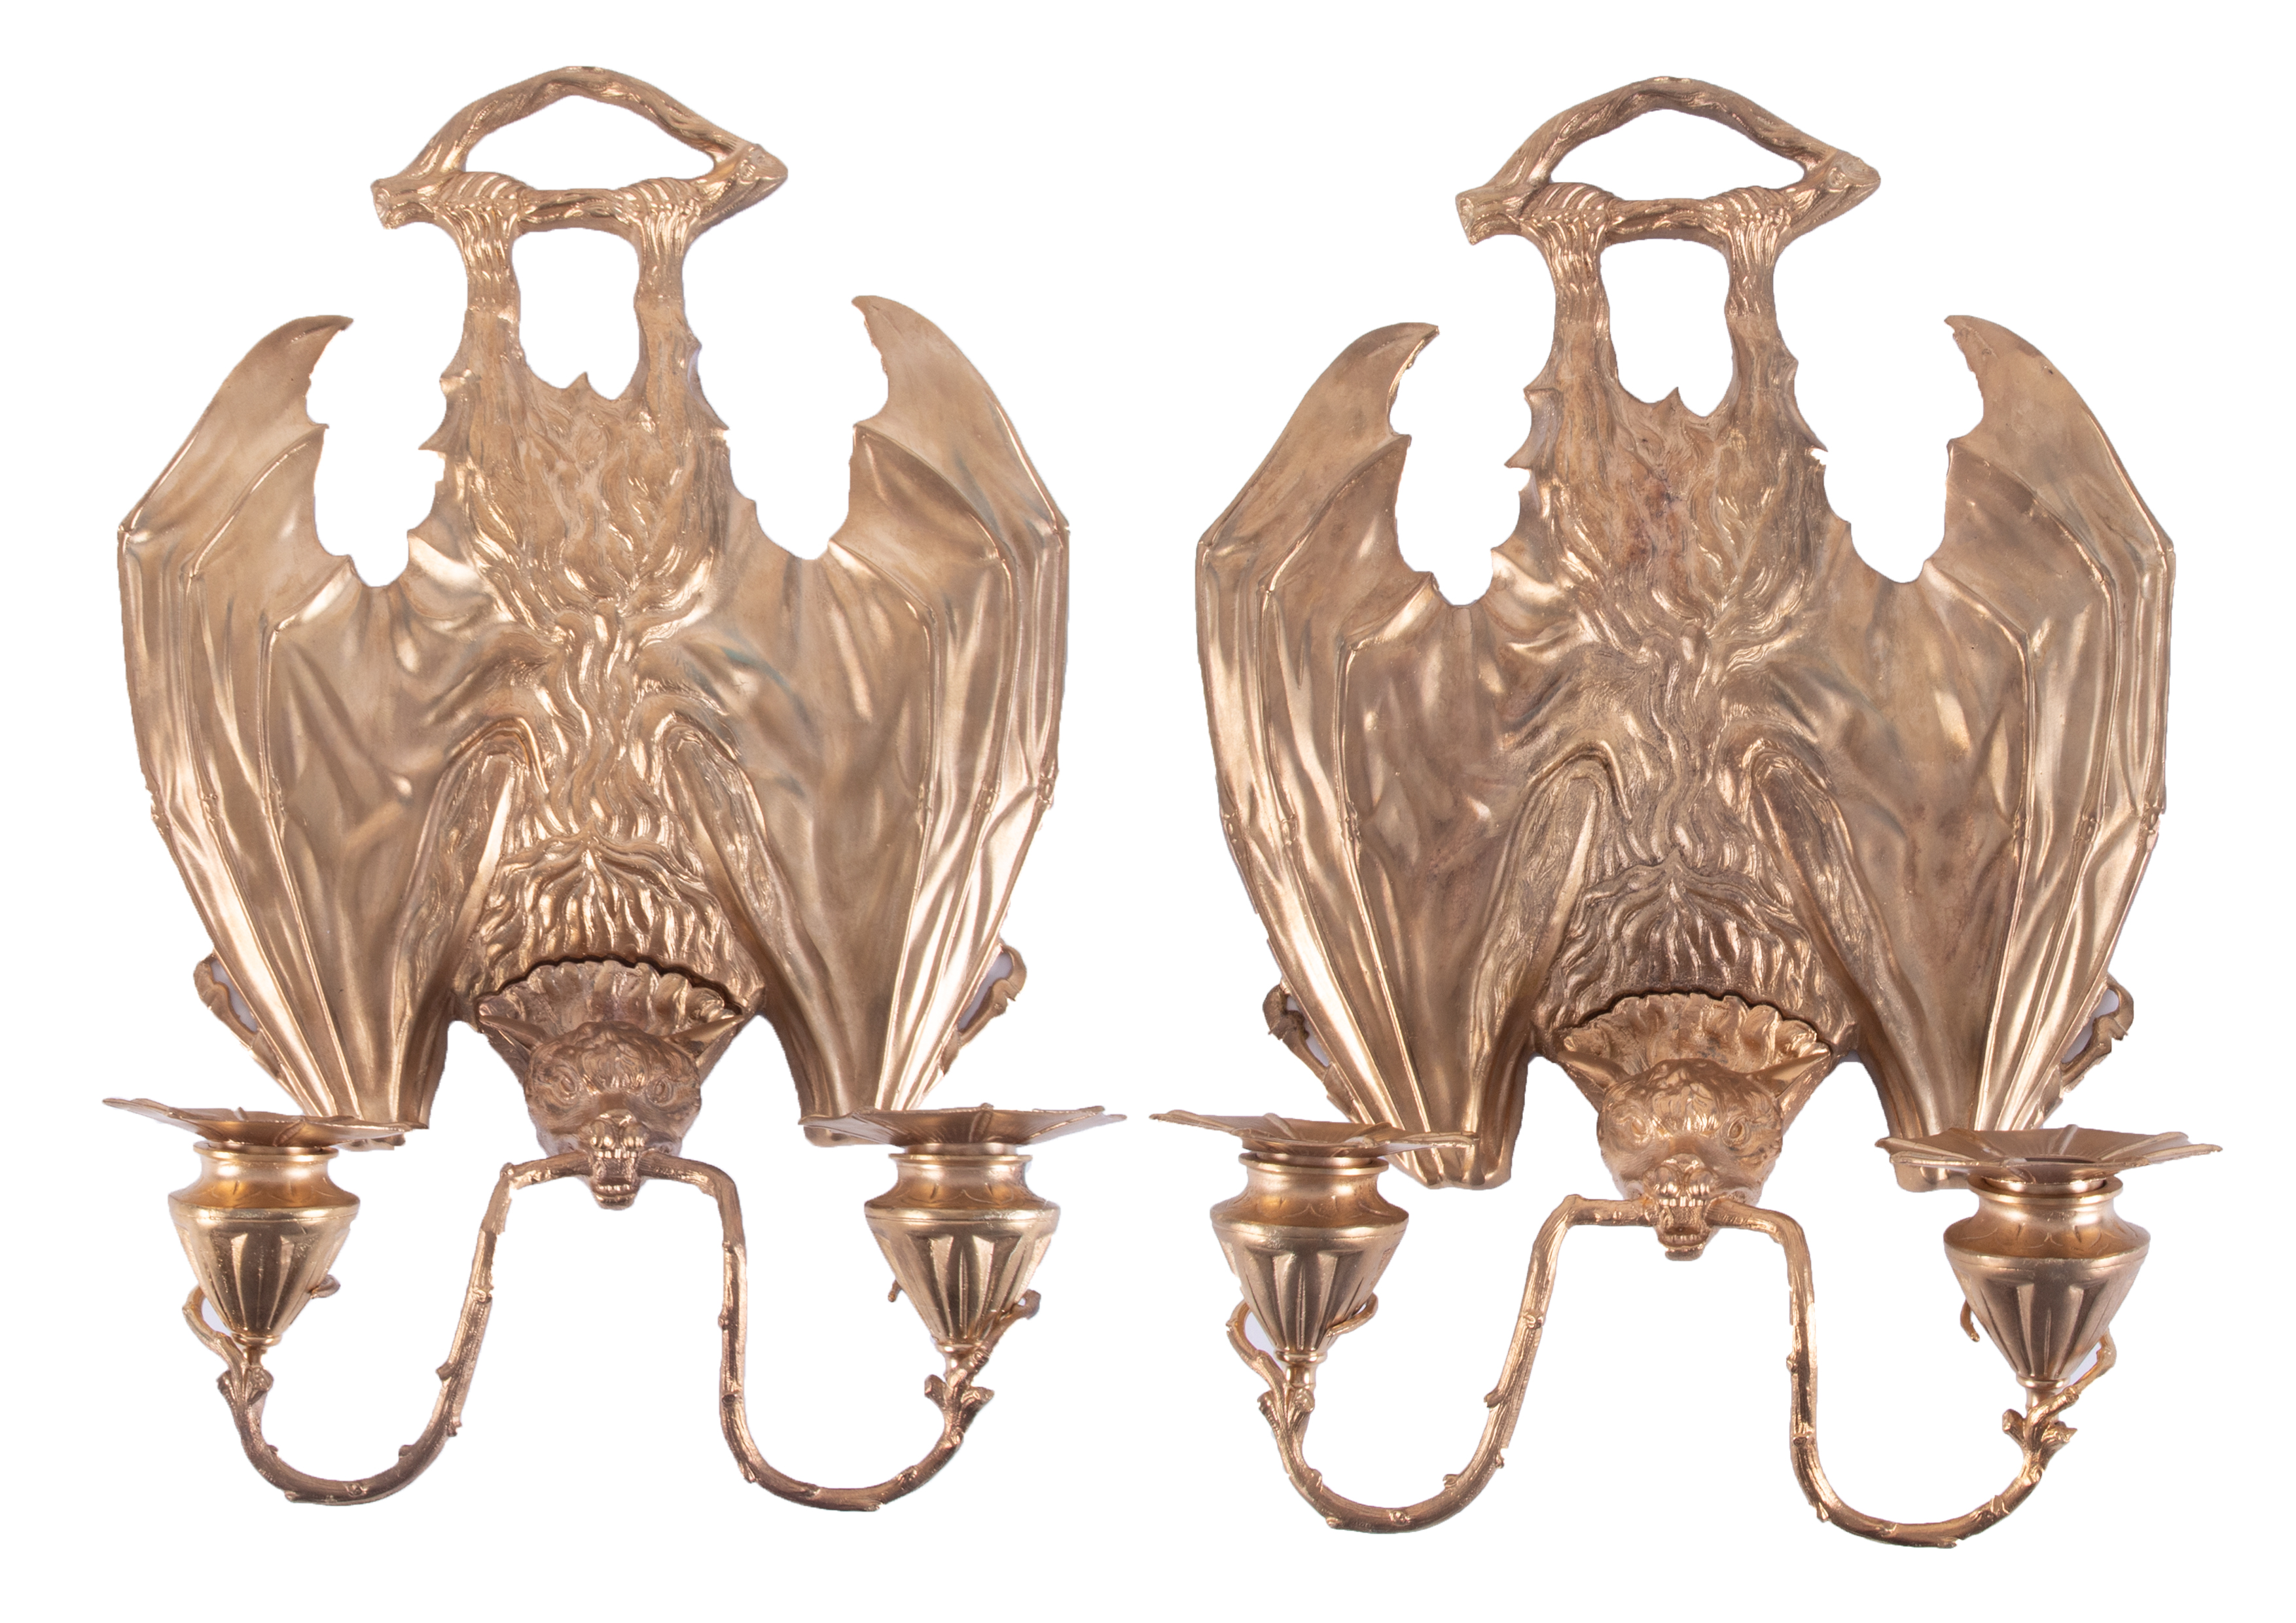 A pair of 20th century Victorian style wall scones in the shape of bats, after an original design by